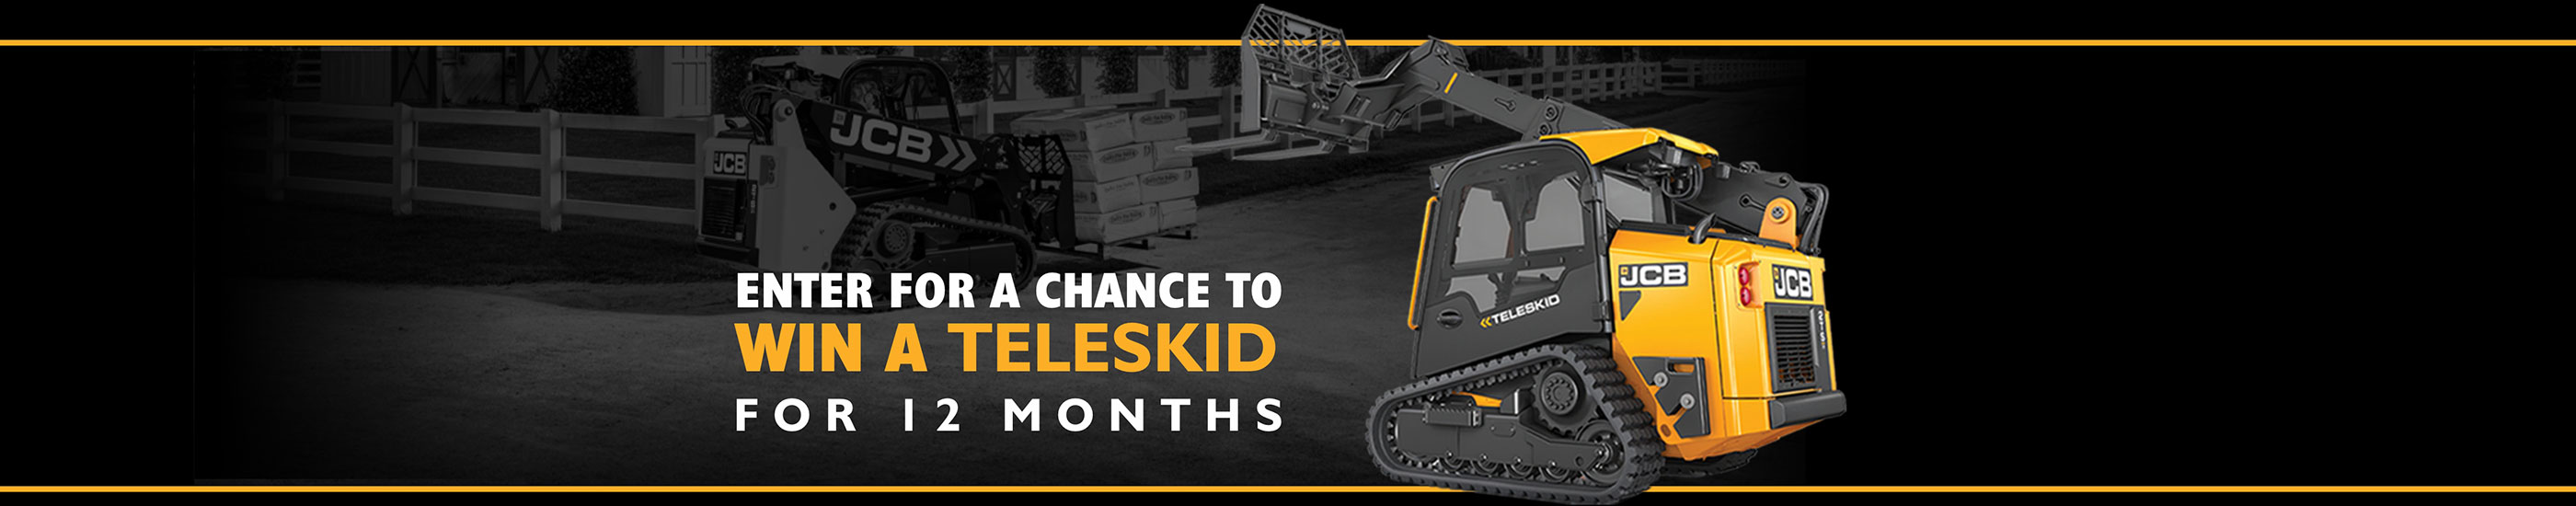 ENTER FOR A CHANCE TO WIN A TELESKID FOR 12 MONTHS